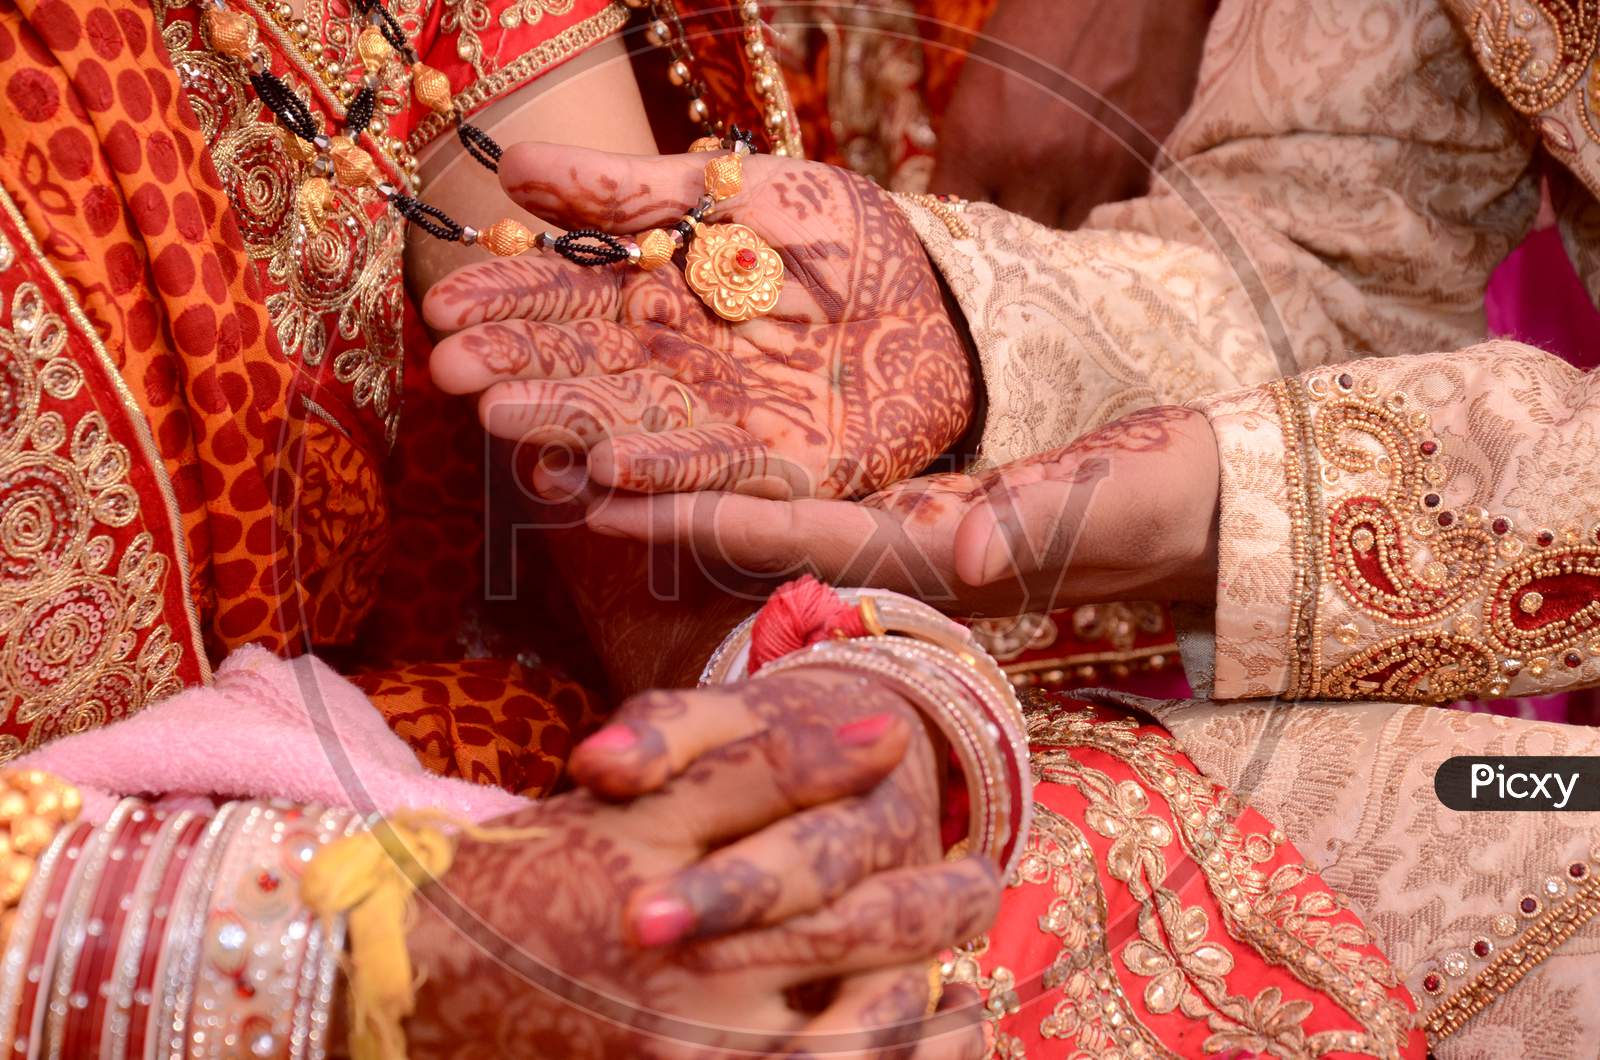 A memorable moments in a wedding ceremony